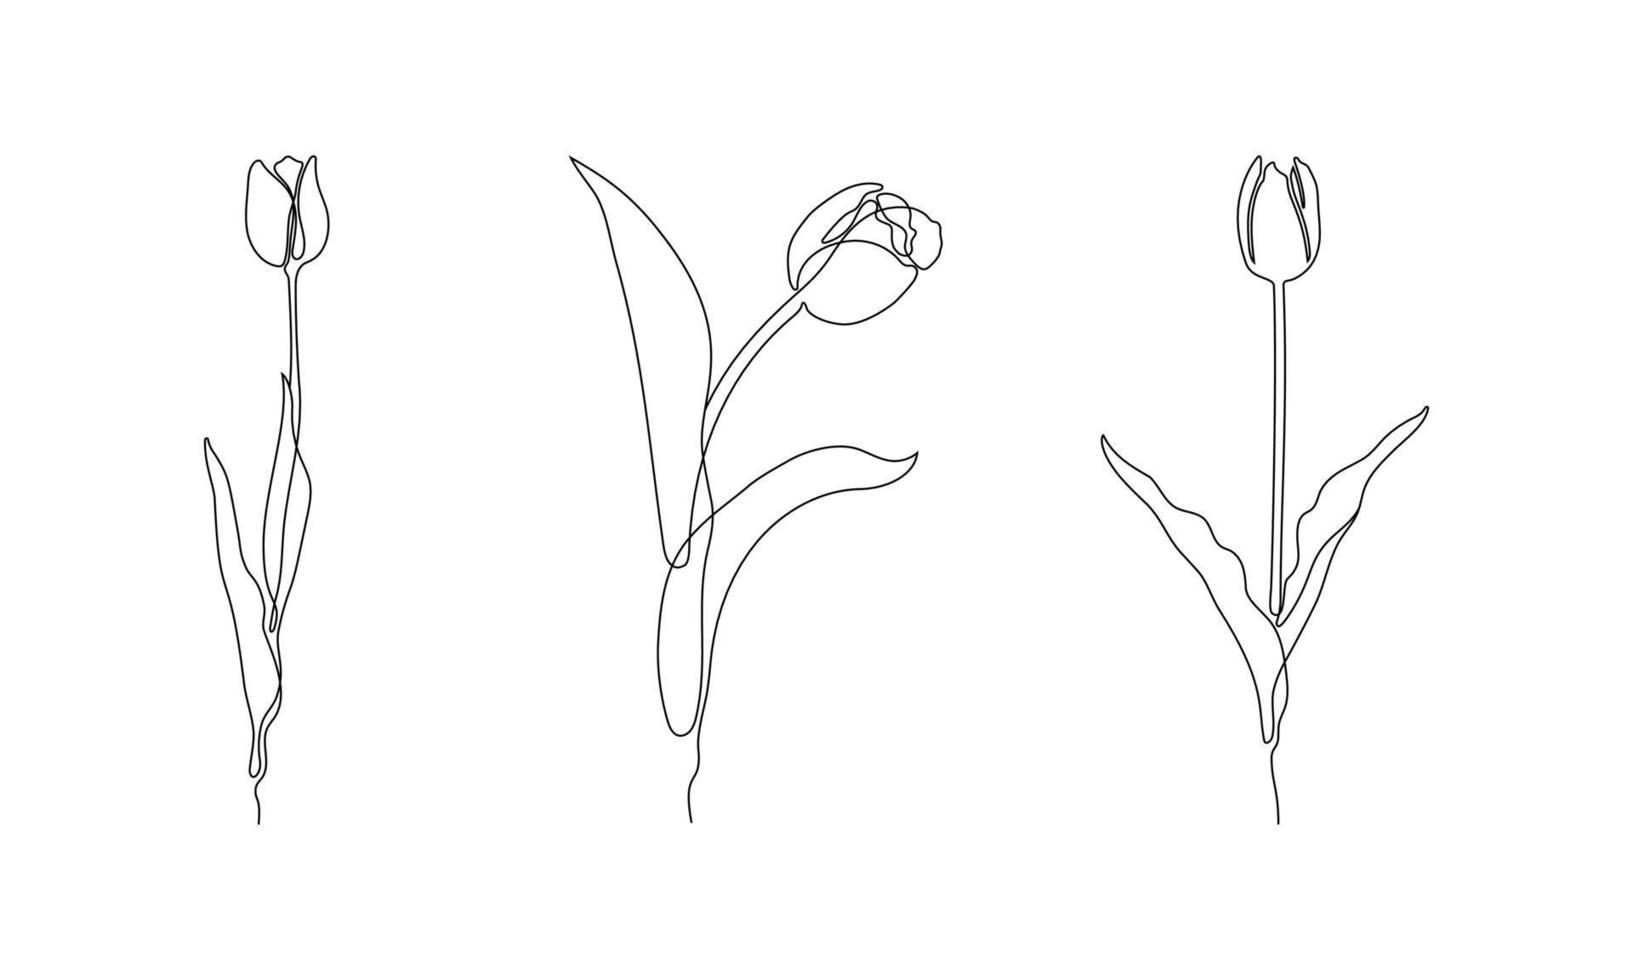 flowers illustration in one line art style. continuous drawing in vector best used for icon, wall art prints, posters, magazine, postcard, etc.